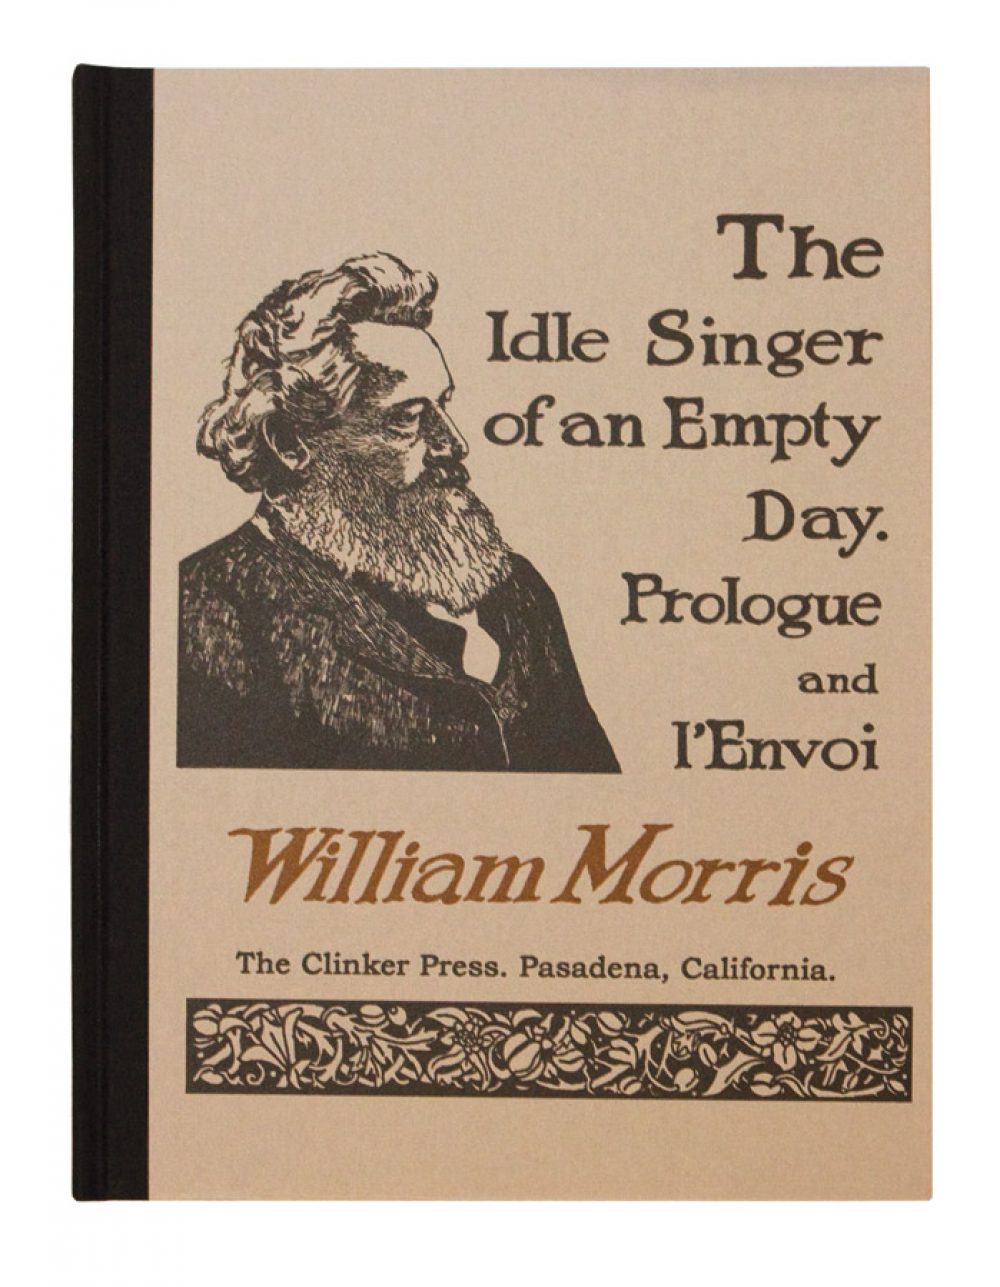 The Idle Singer of an Empty Day by William Morris